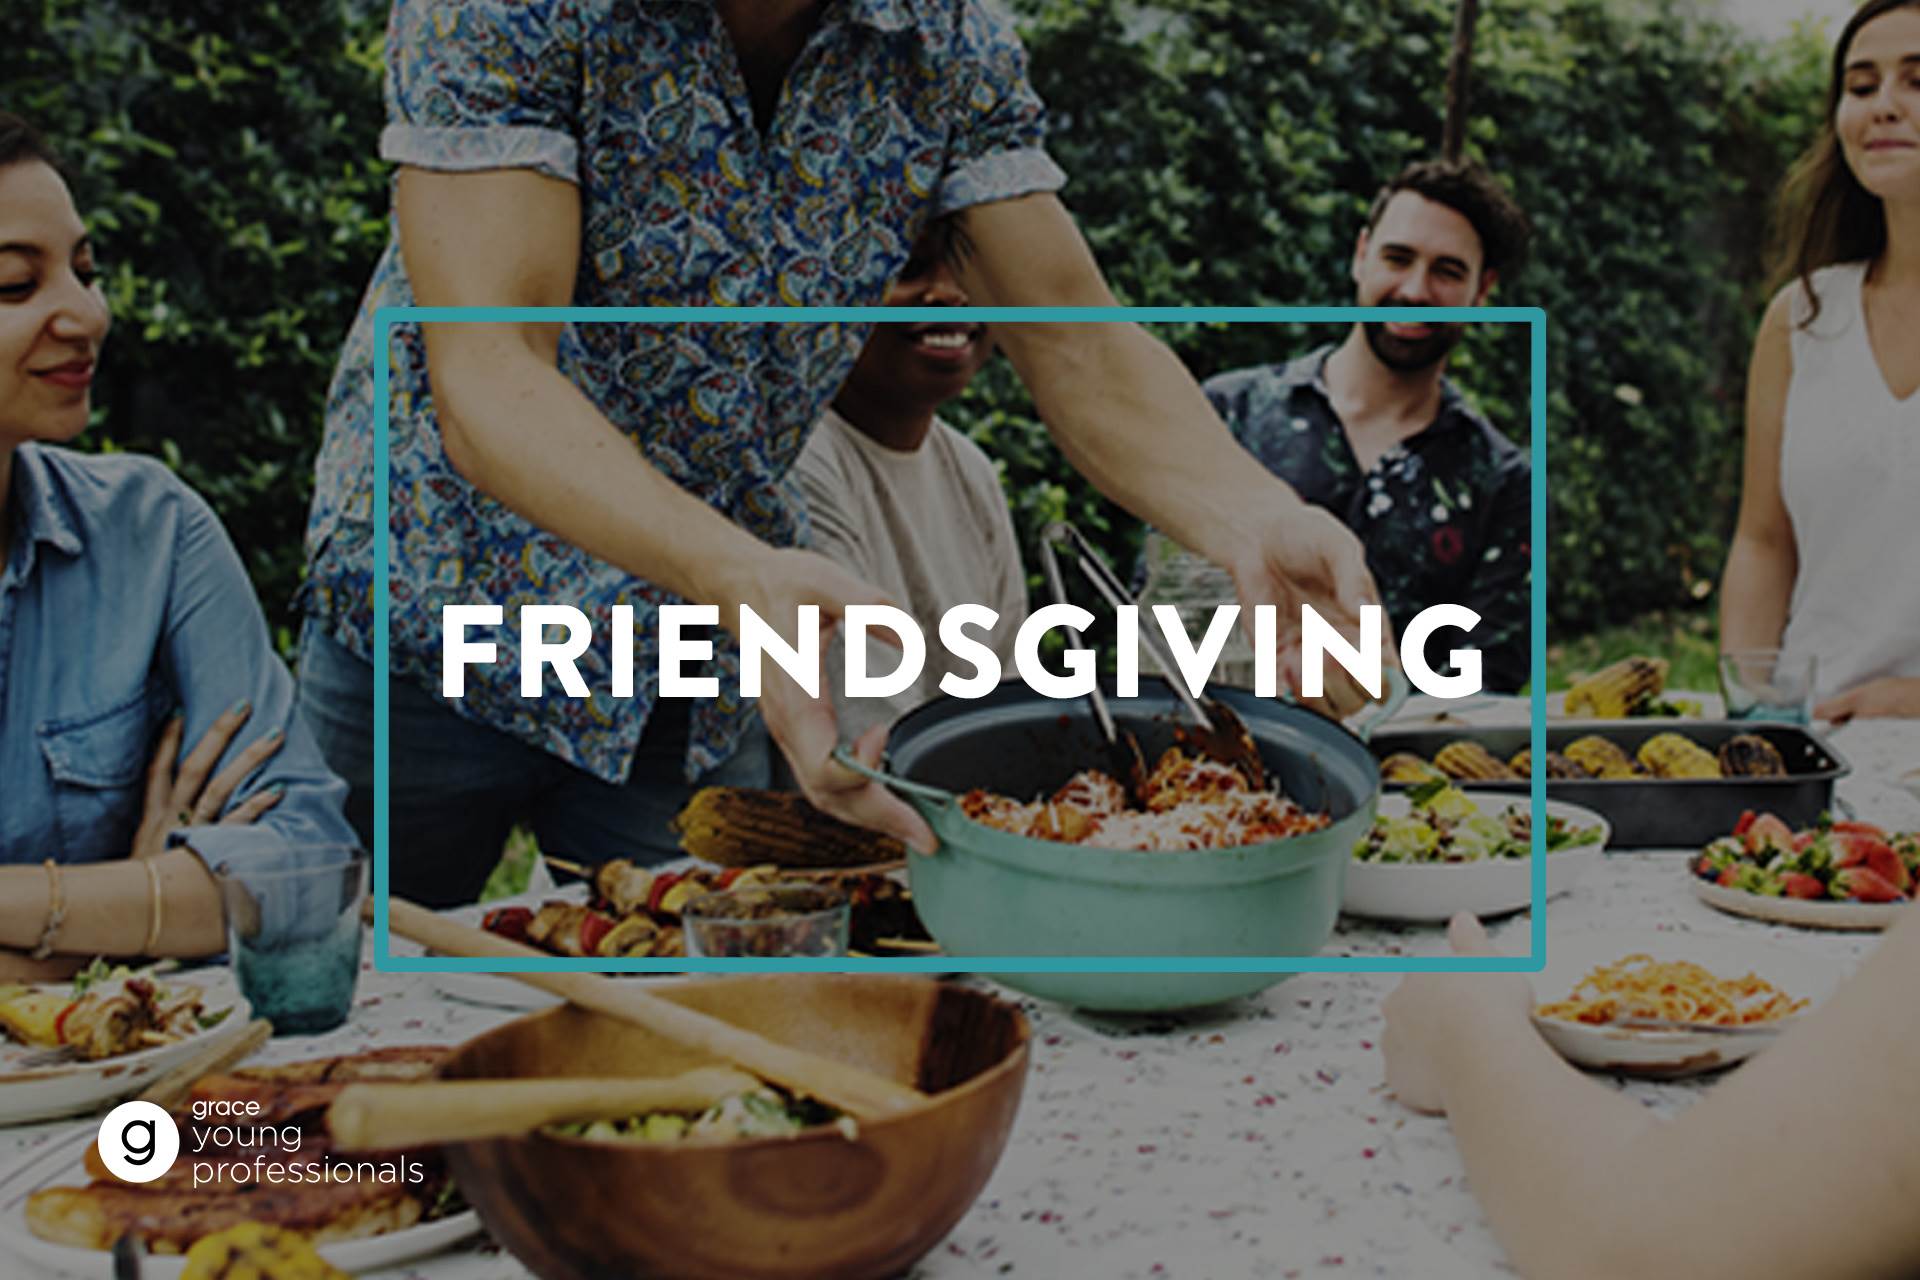 Link to Friendsgiving detail page